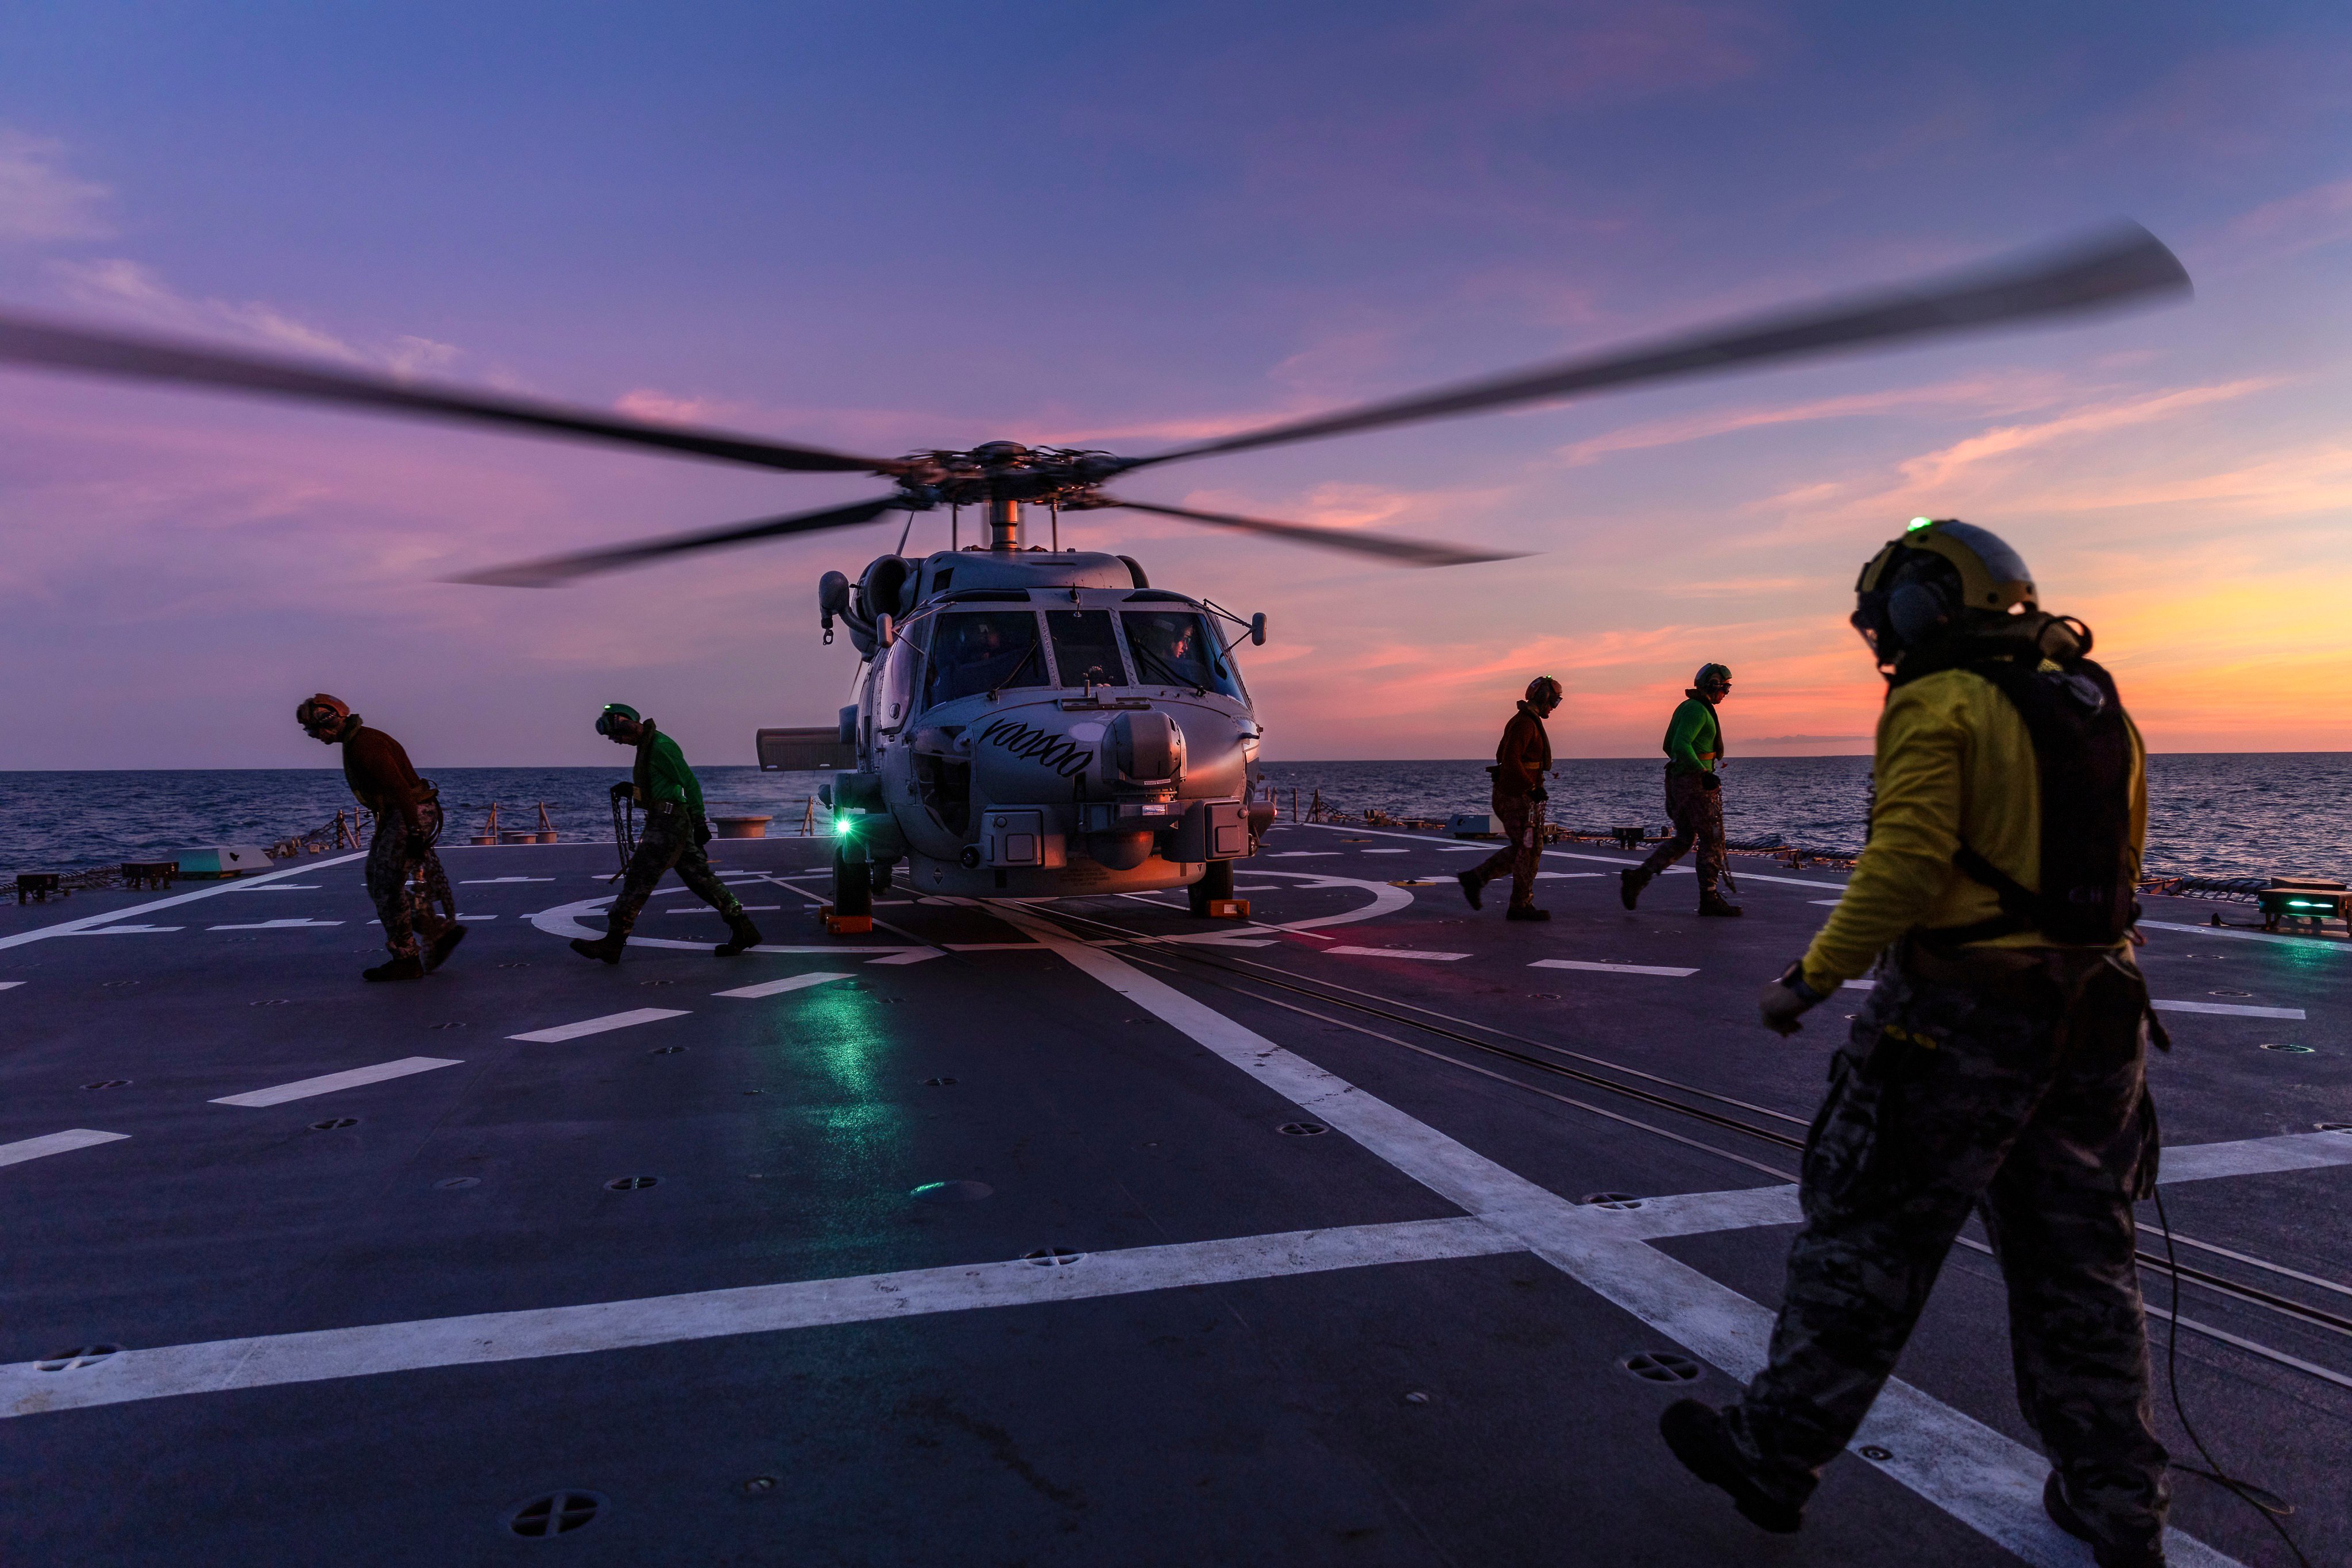 A Seahawk helicopter prepares to take off from the deck of HMAS Hobart during flying operations while on a regional presence deployment off northern Australia. Photo: AP